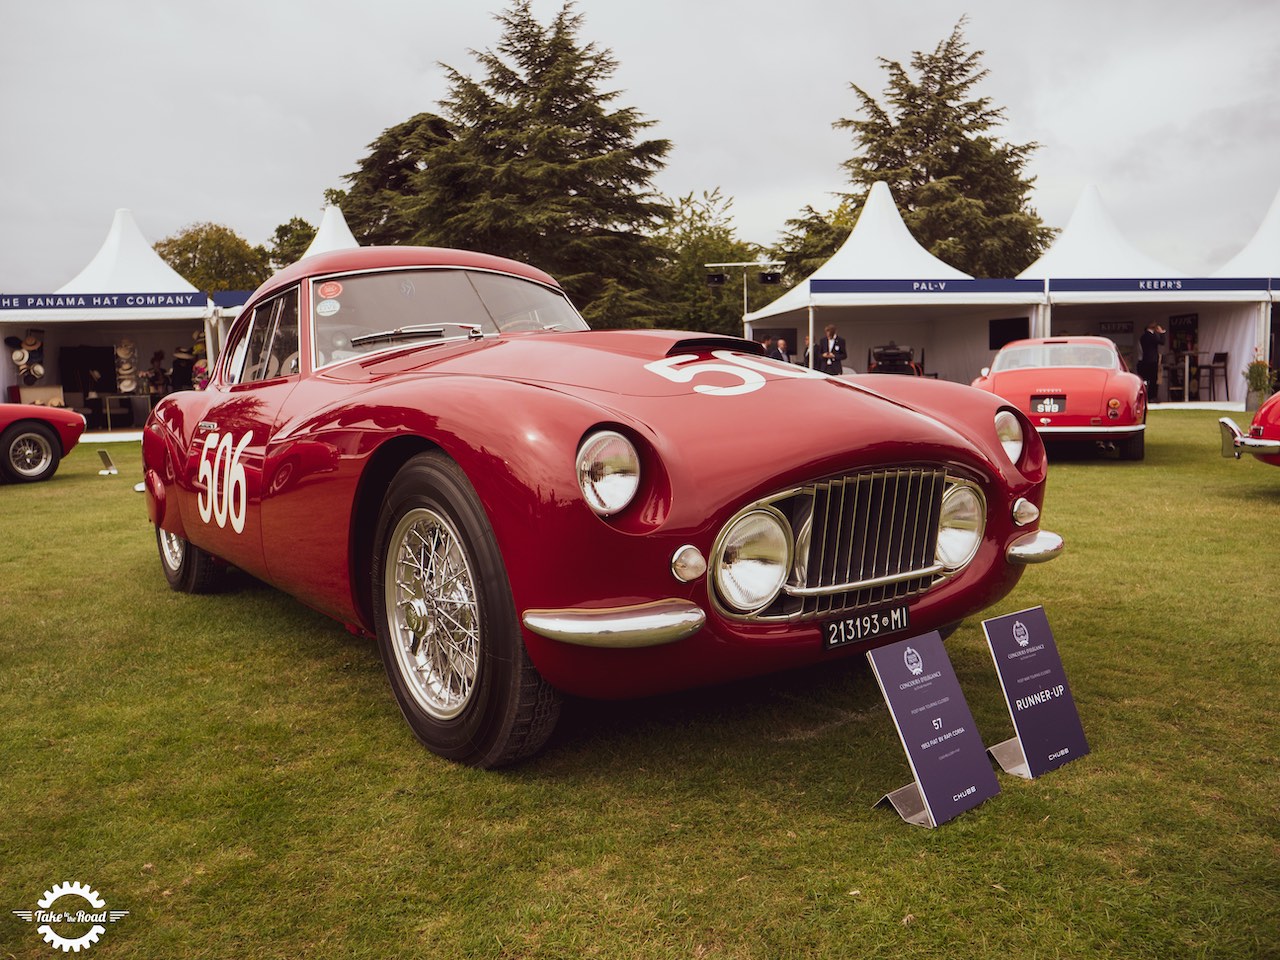 Rare cars and Specialist Dealers confirmed for Salon Privé London